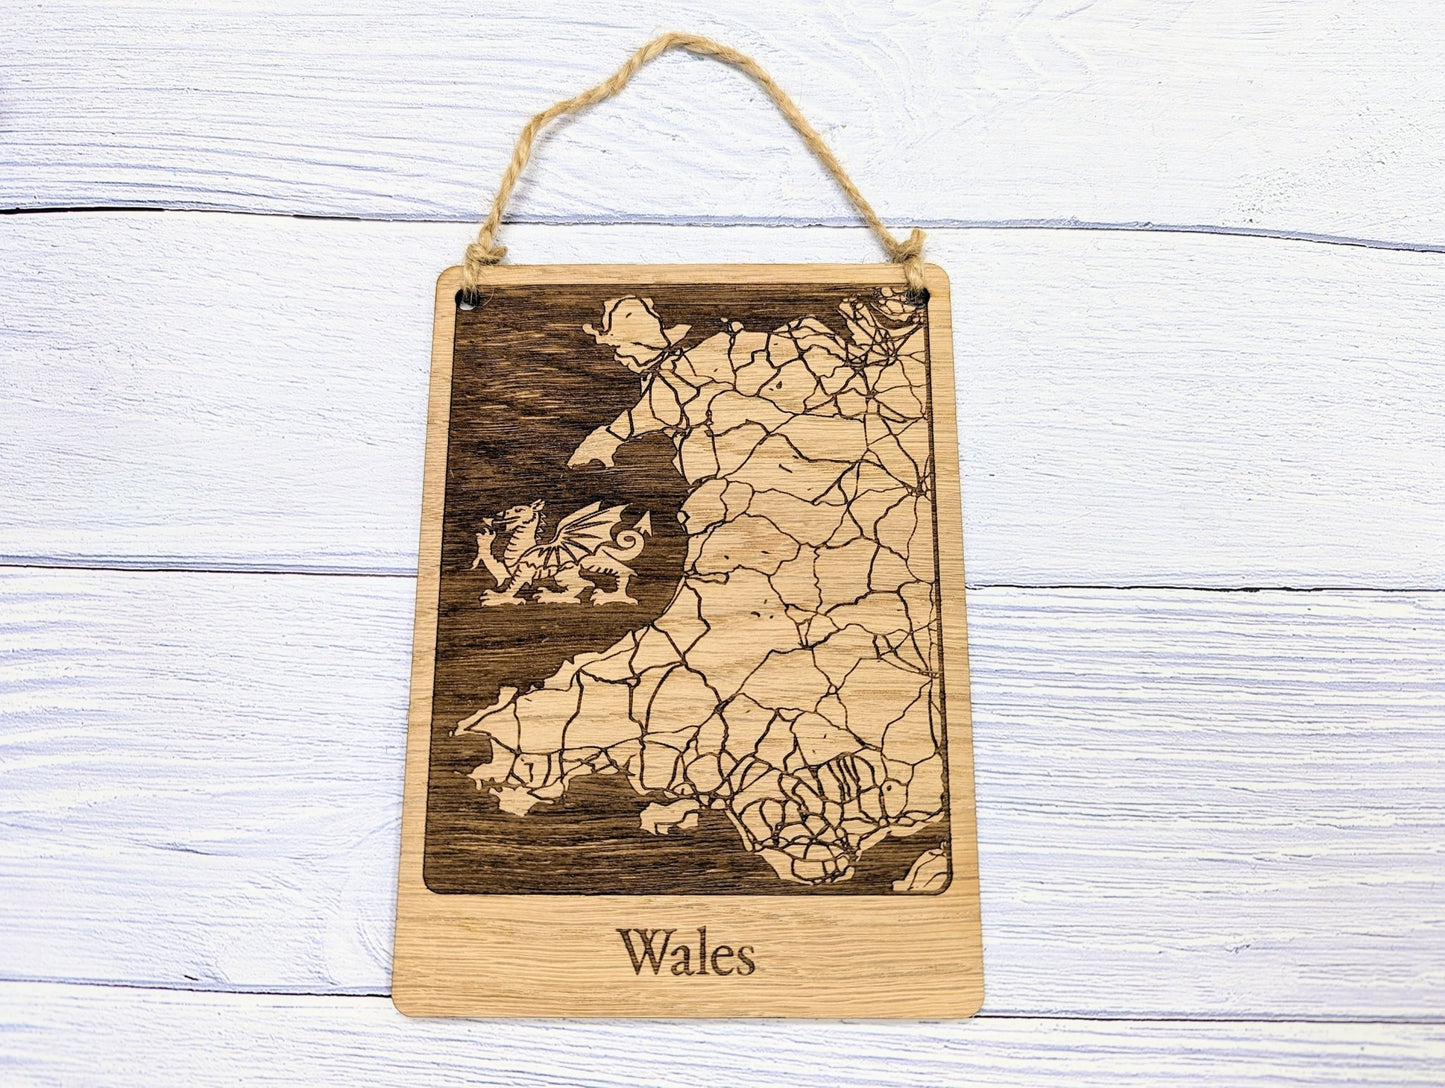 Wooden Map Wall Art of Wales with Engraved Welsh Dragon - Oak Finish - Customisable Home Decor - CherryGroveCraft